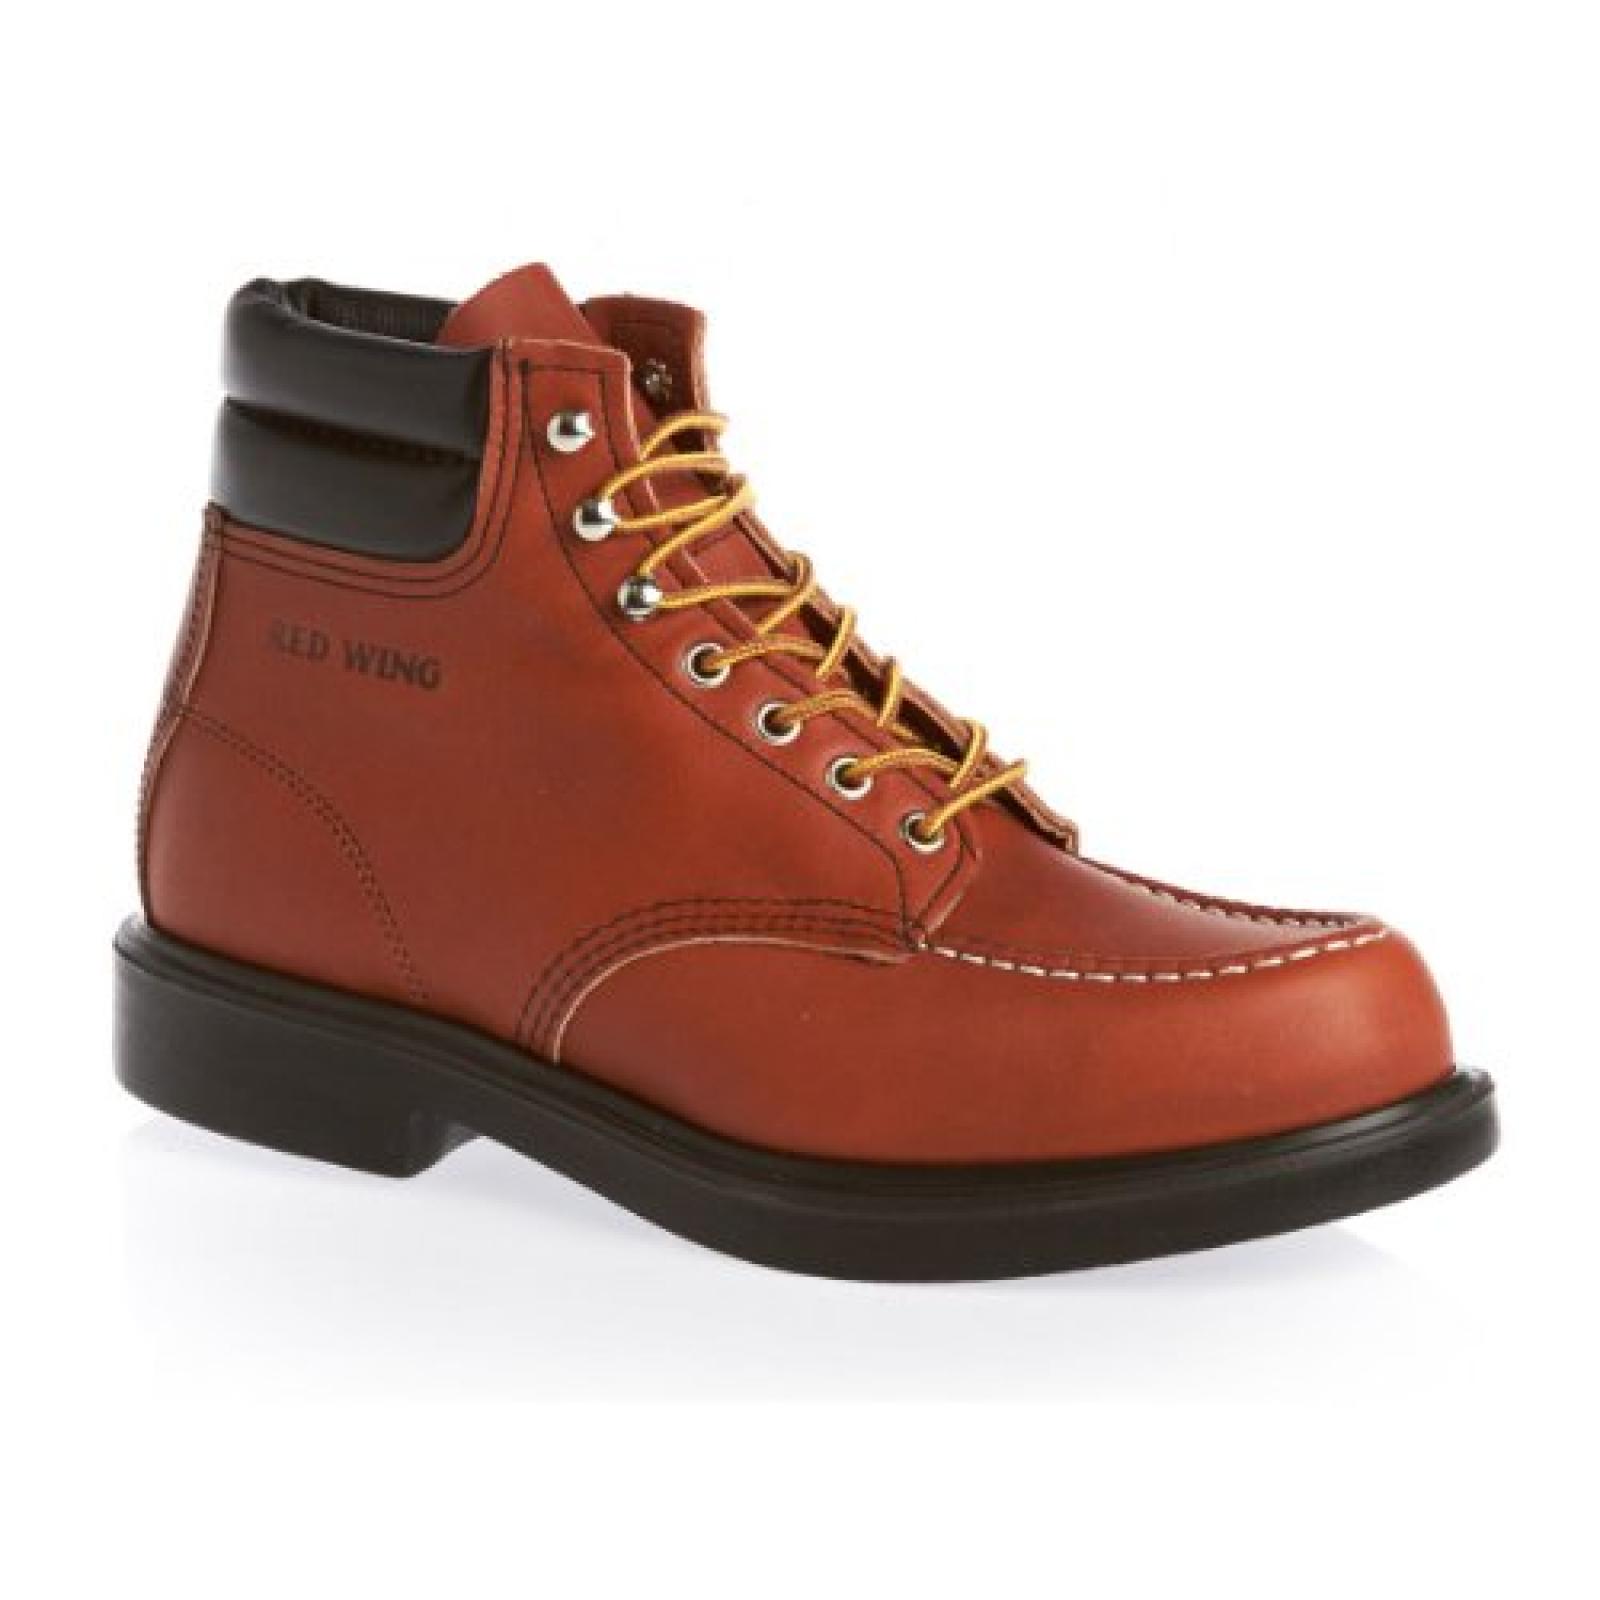 Red Wing Heriatage Moc Toe Boots - Oro Russet Portage 